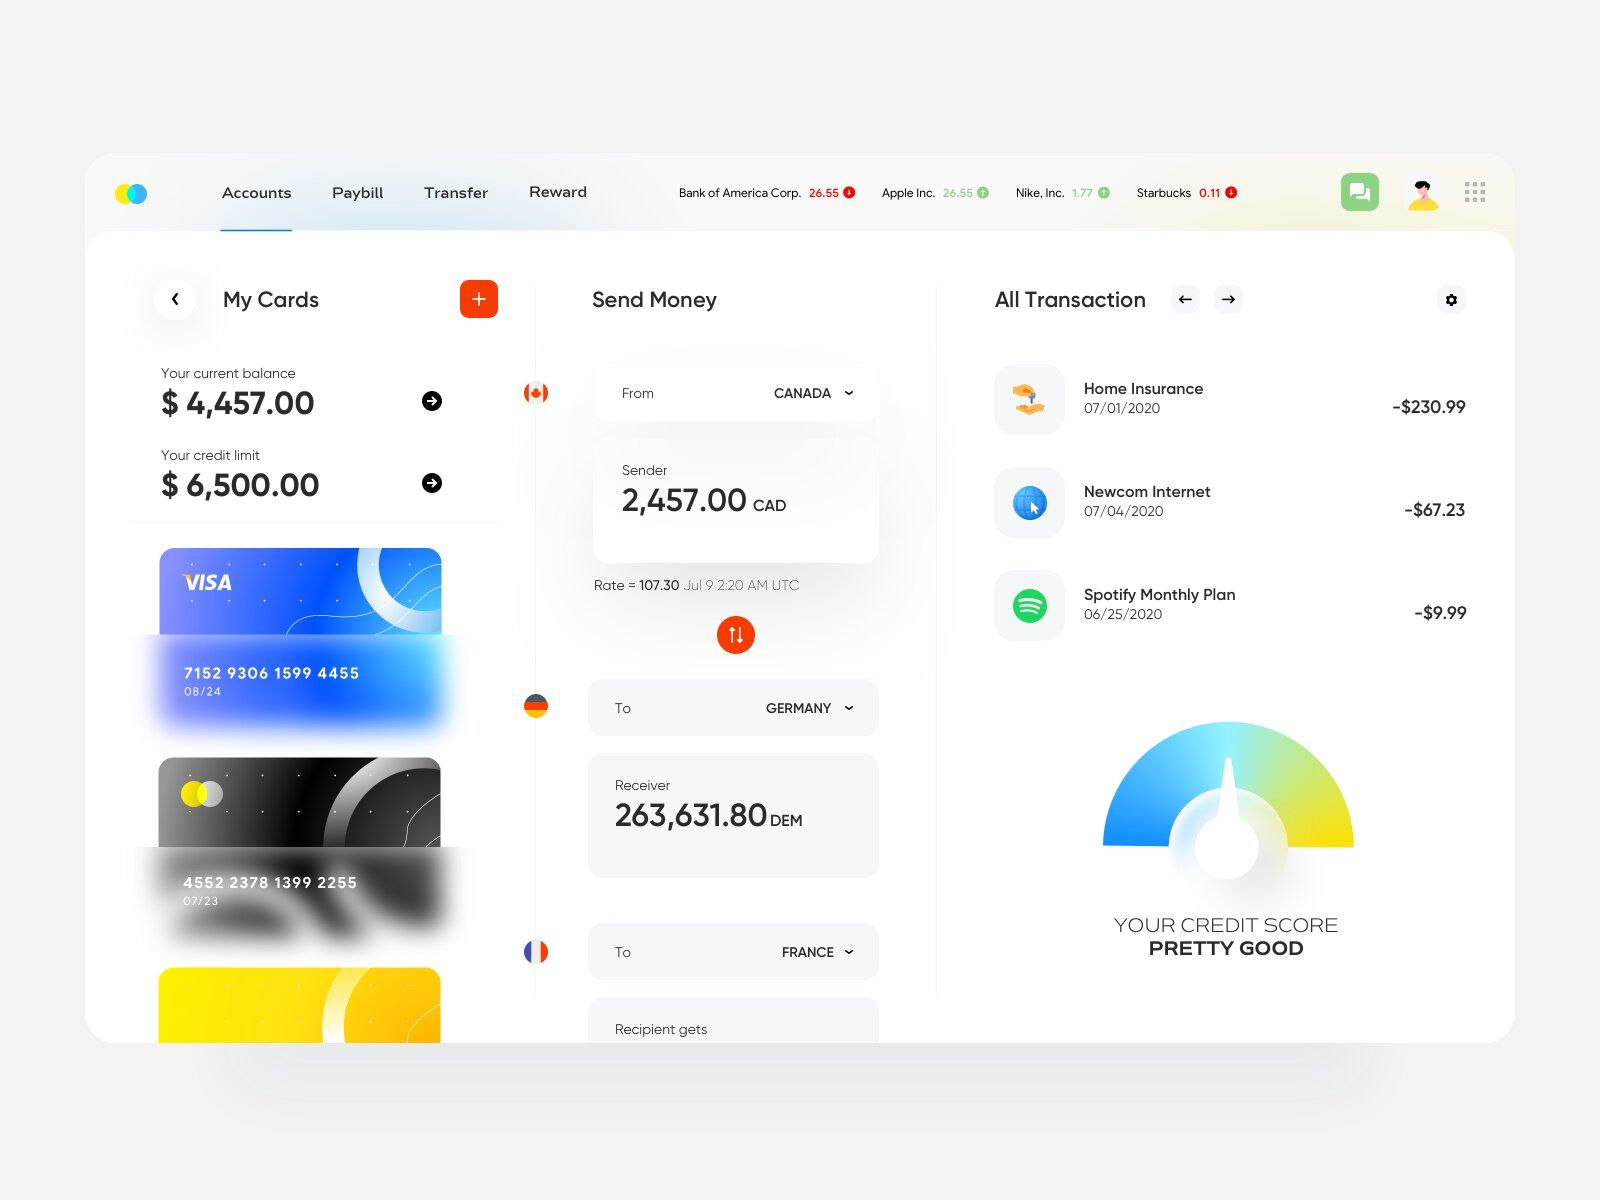 Banking web-based software should have a Home Screen with a user-friendly &amp; management system (*image by [Ariuka](https://dribbble.com/Ariuka_dsgn){ rel="nofollow" .default-md}*)